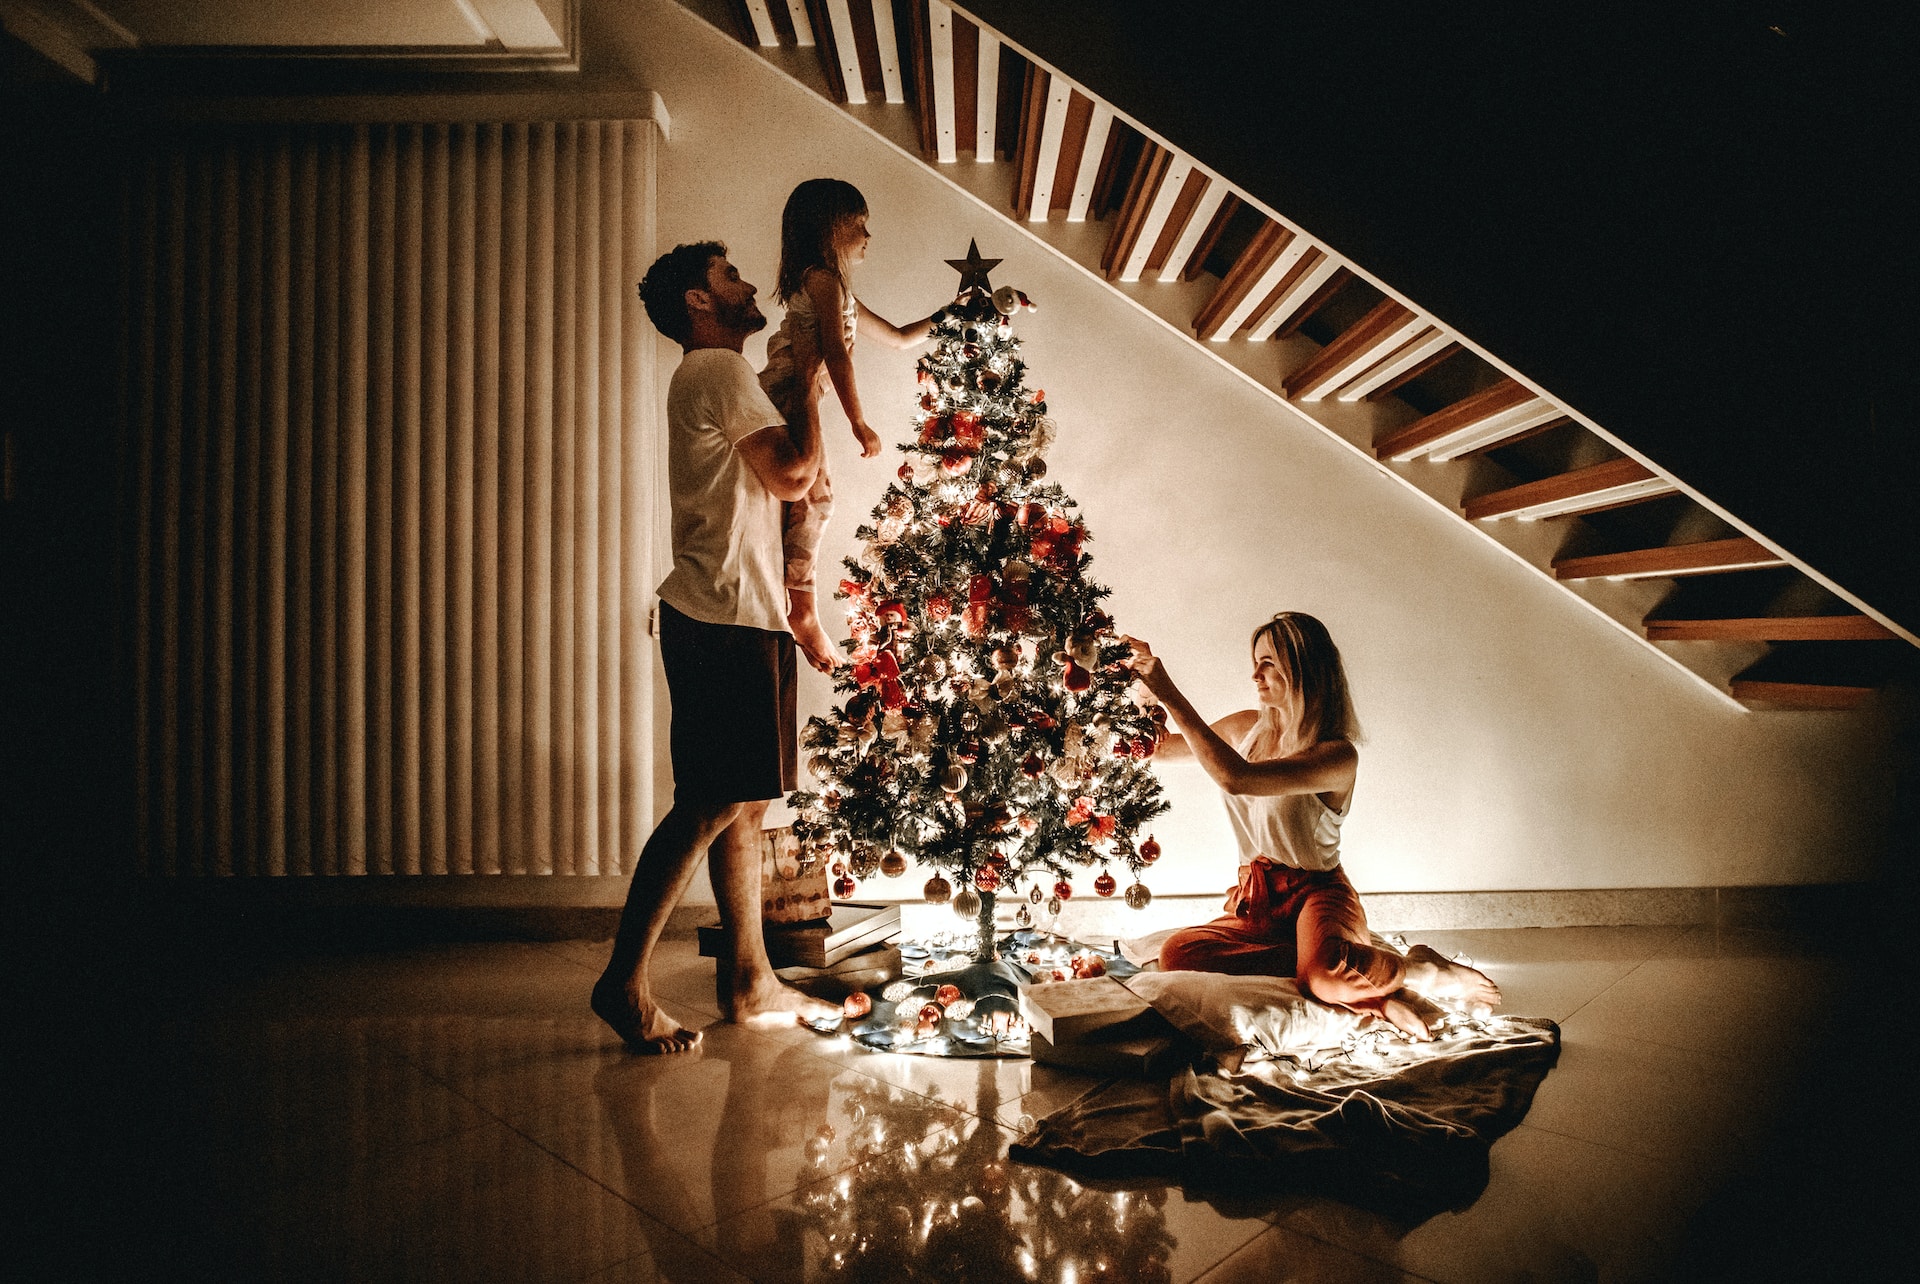 Christmas holidays in Serbia are known to be a bonding time for the whole family.